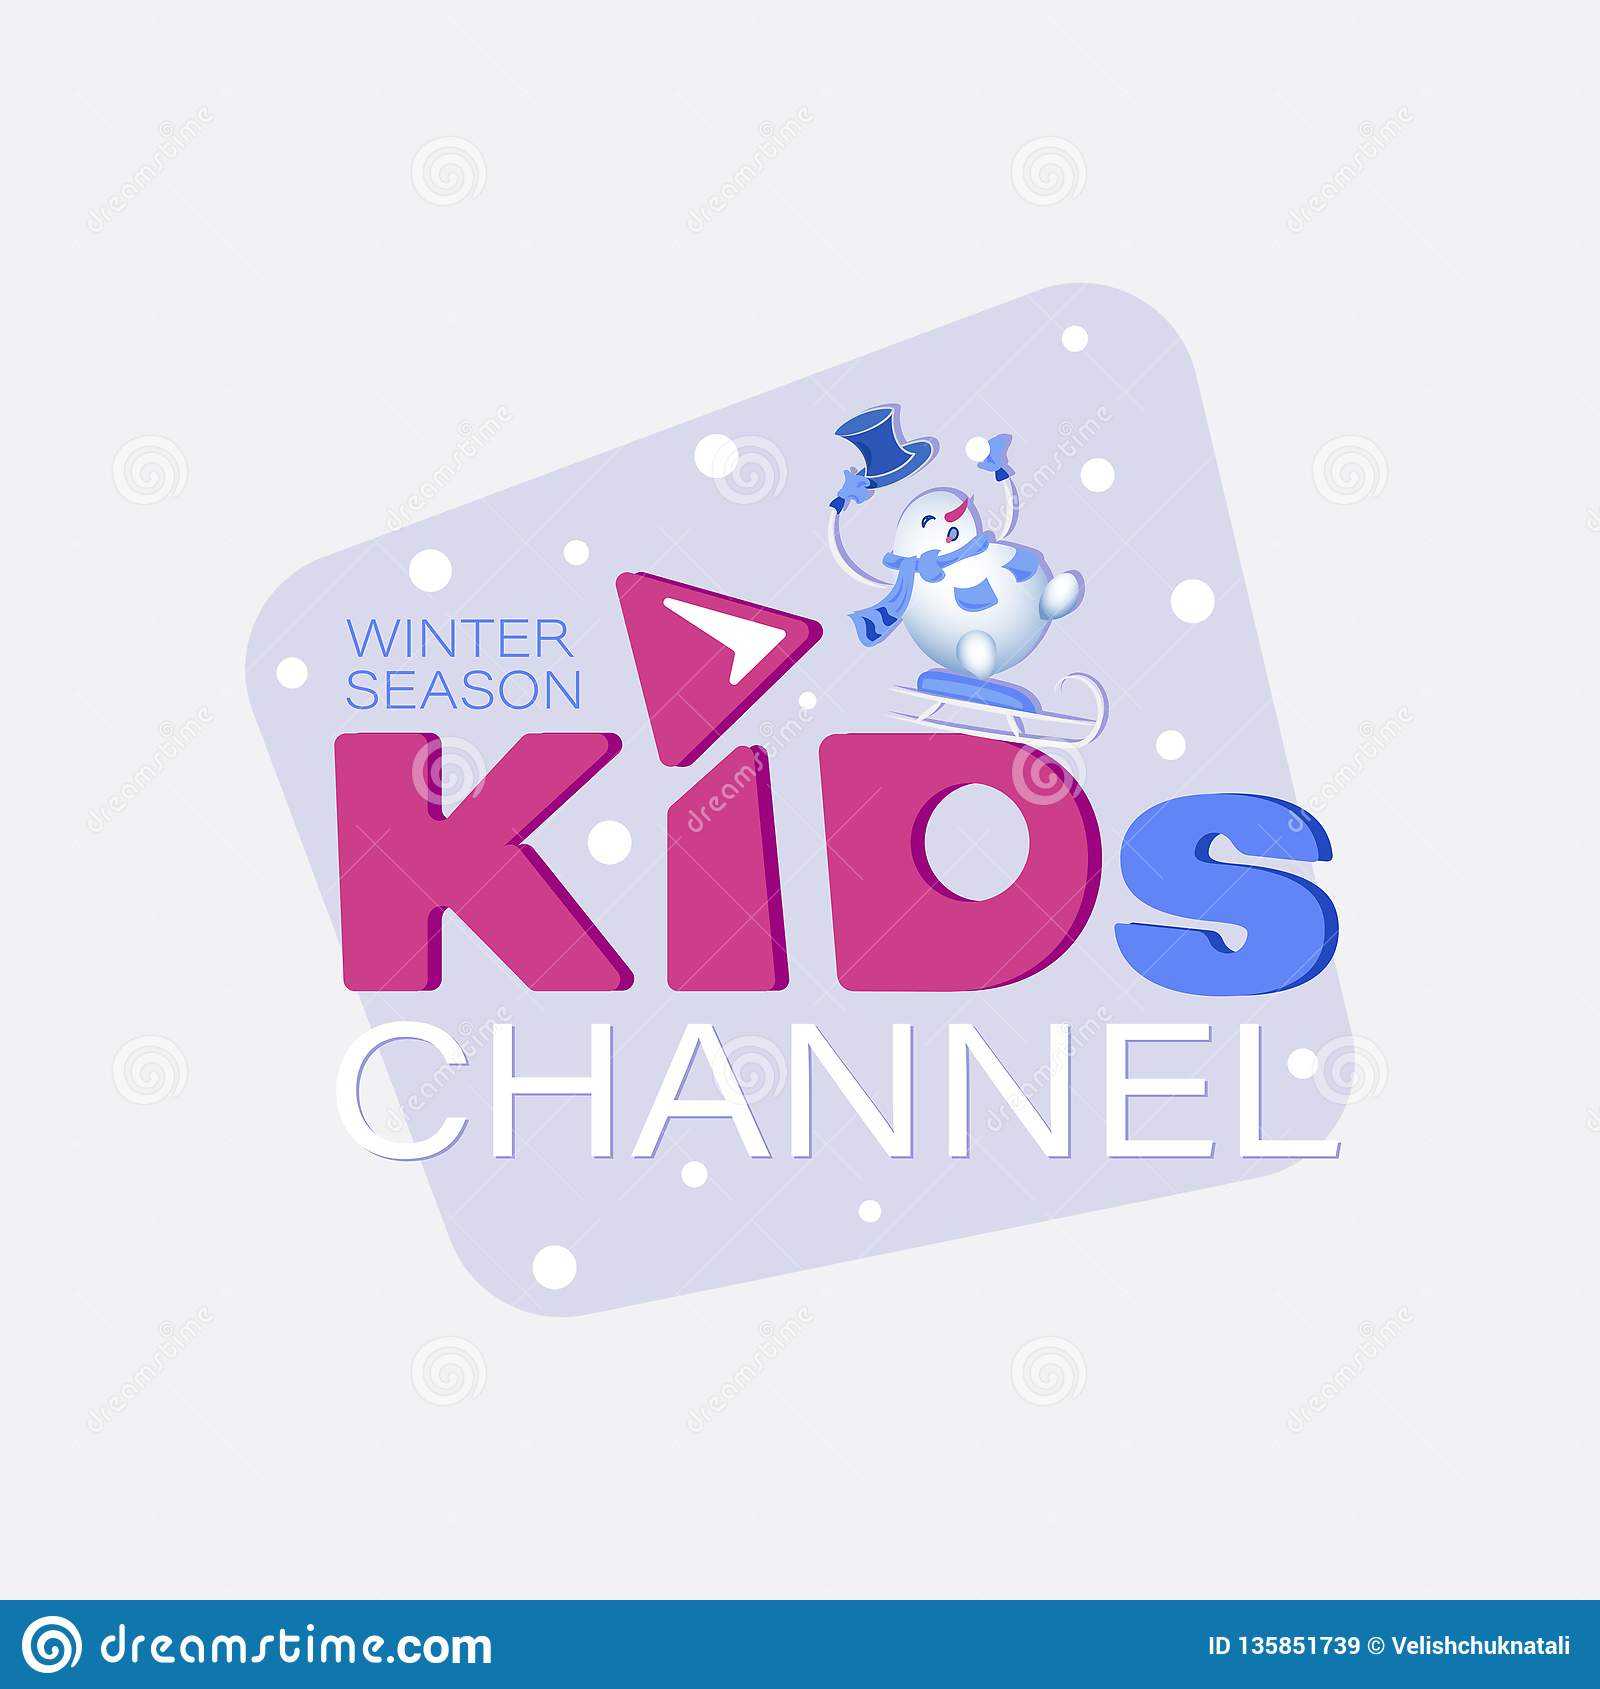 Winter Season. Channel Logo Design Template For Kids. Stock Throughout Credit Card Template For Kids